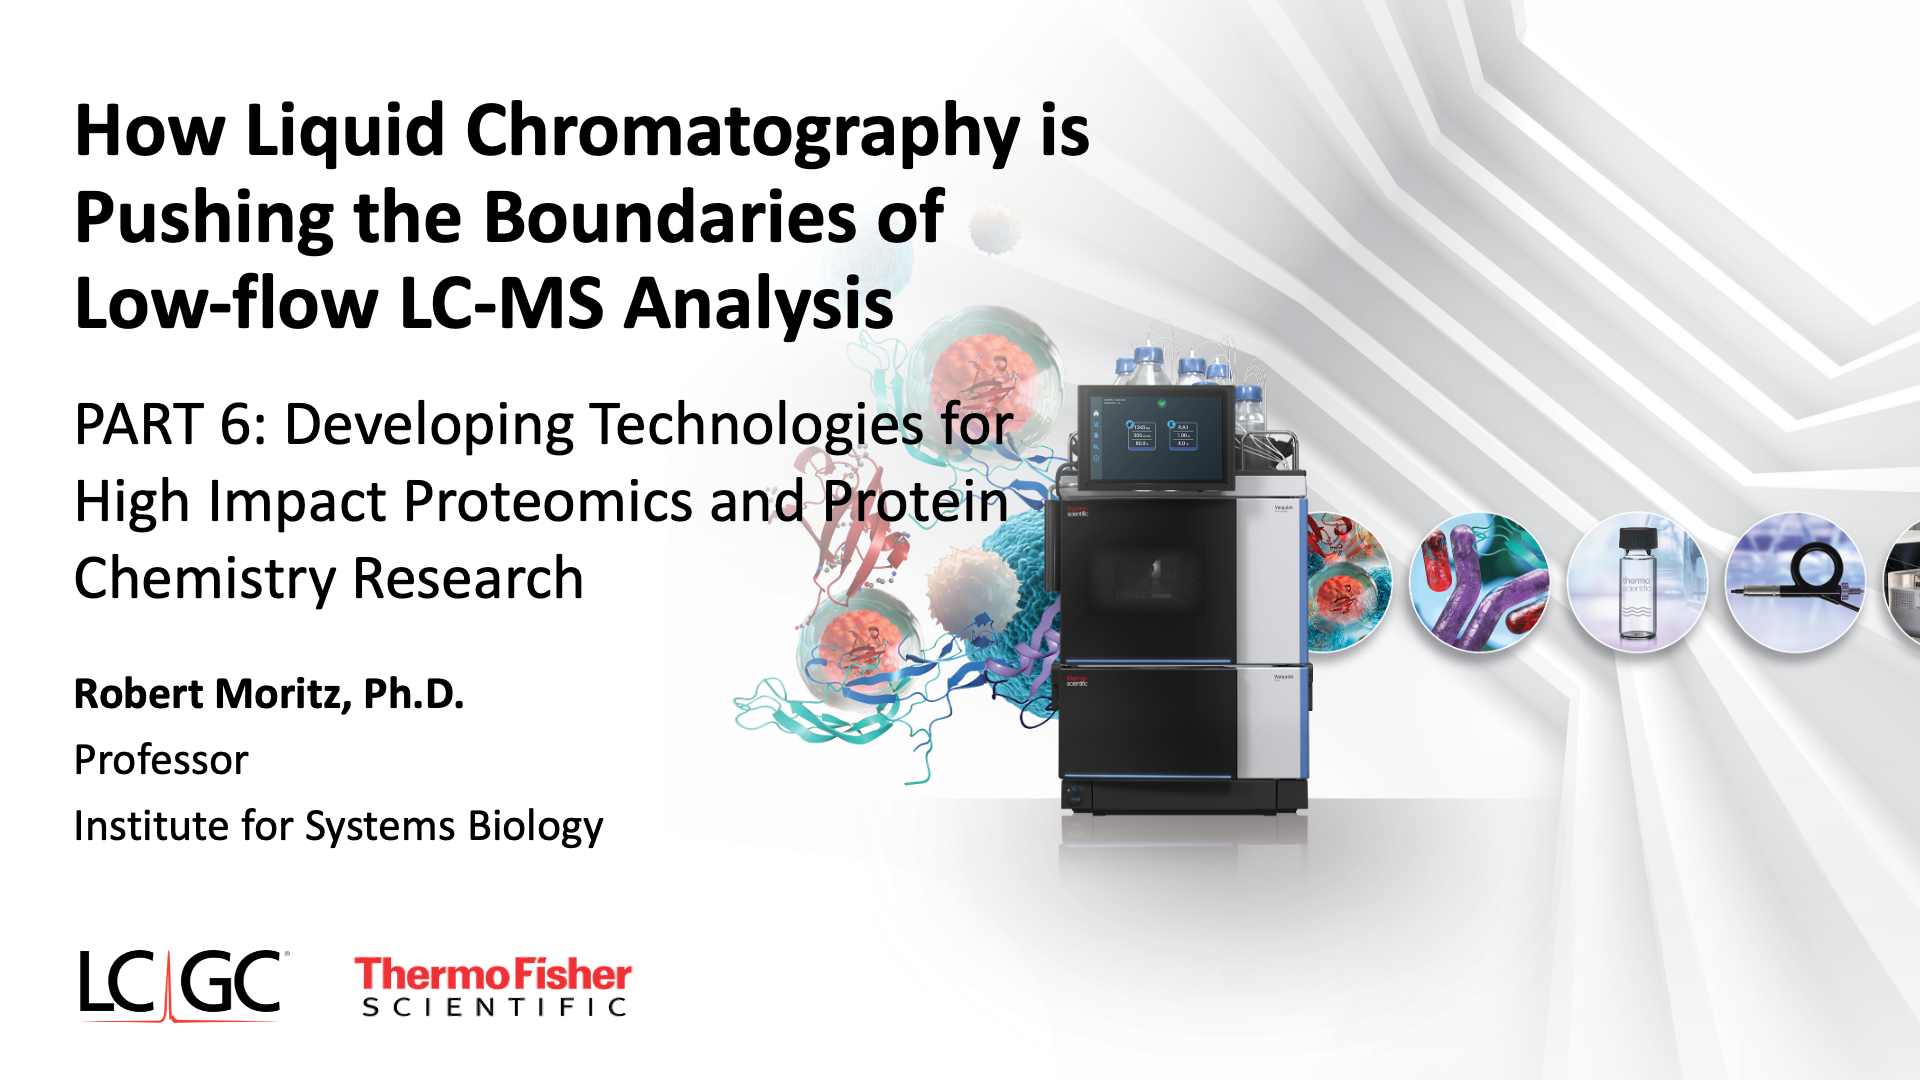 Developing Technologies for High Impact Proteomics and Protein Chemistry Research 